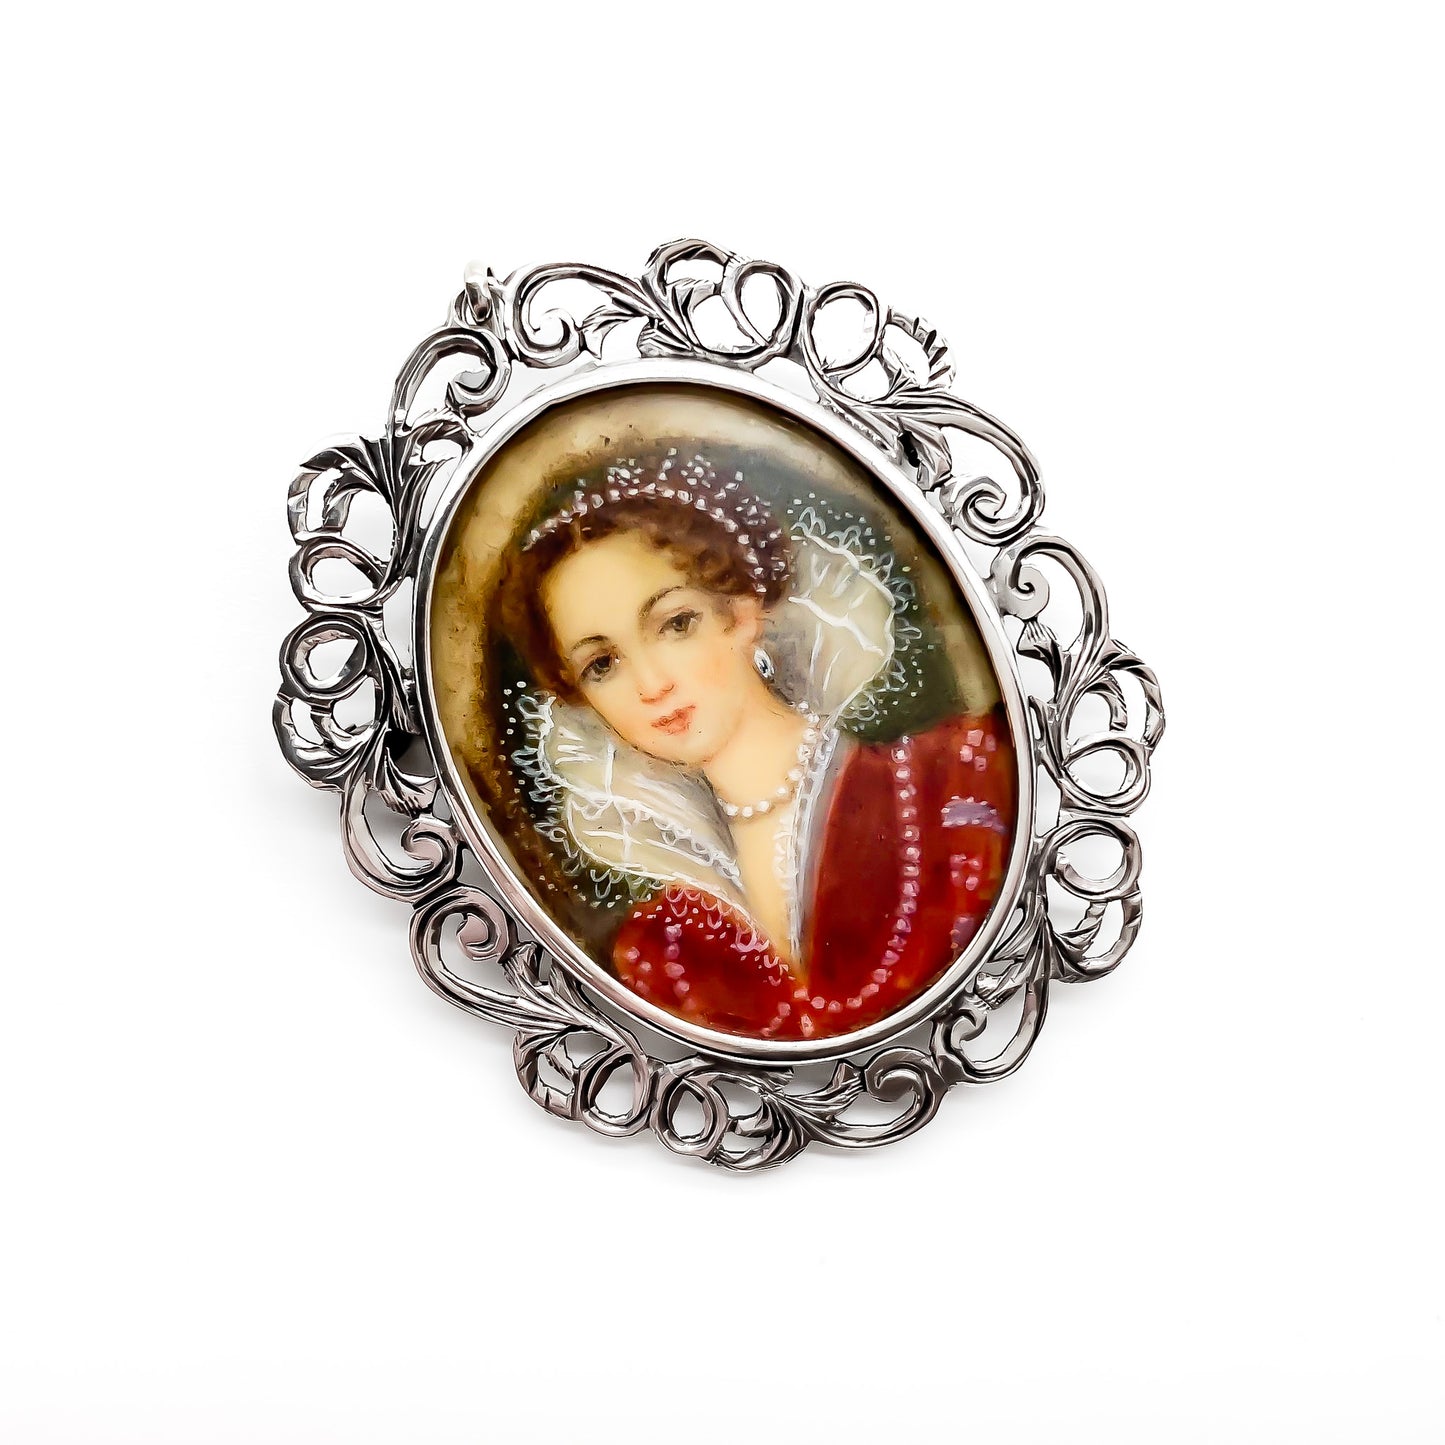 Beautiful antique European hand painted miniature set in an intricate silver (900) frame. Can be worn as a pendant or a brooch.